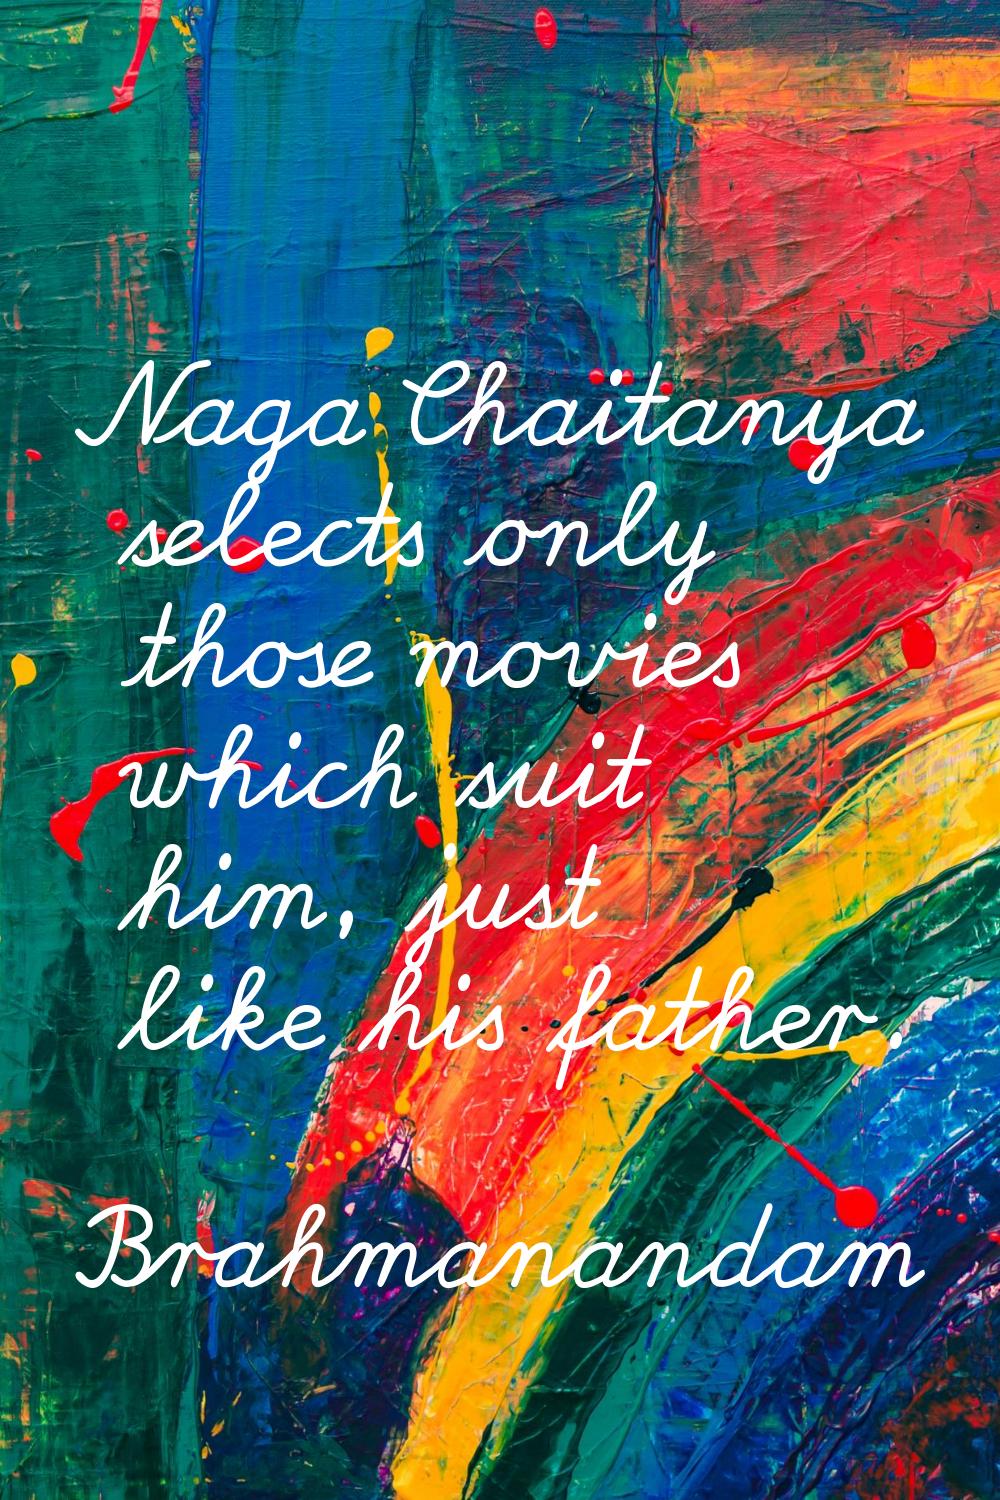 Naga Chaitanya selects only those movies which suit him, just like his father.